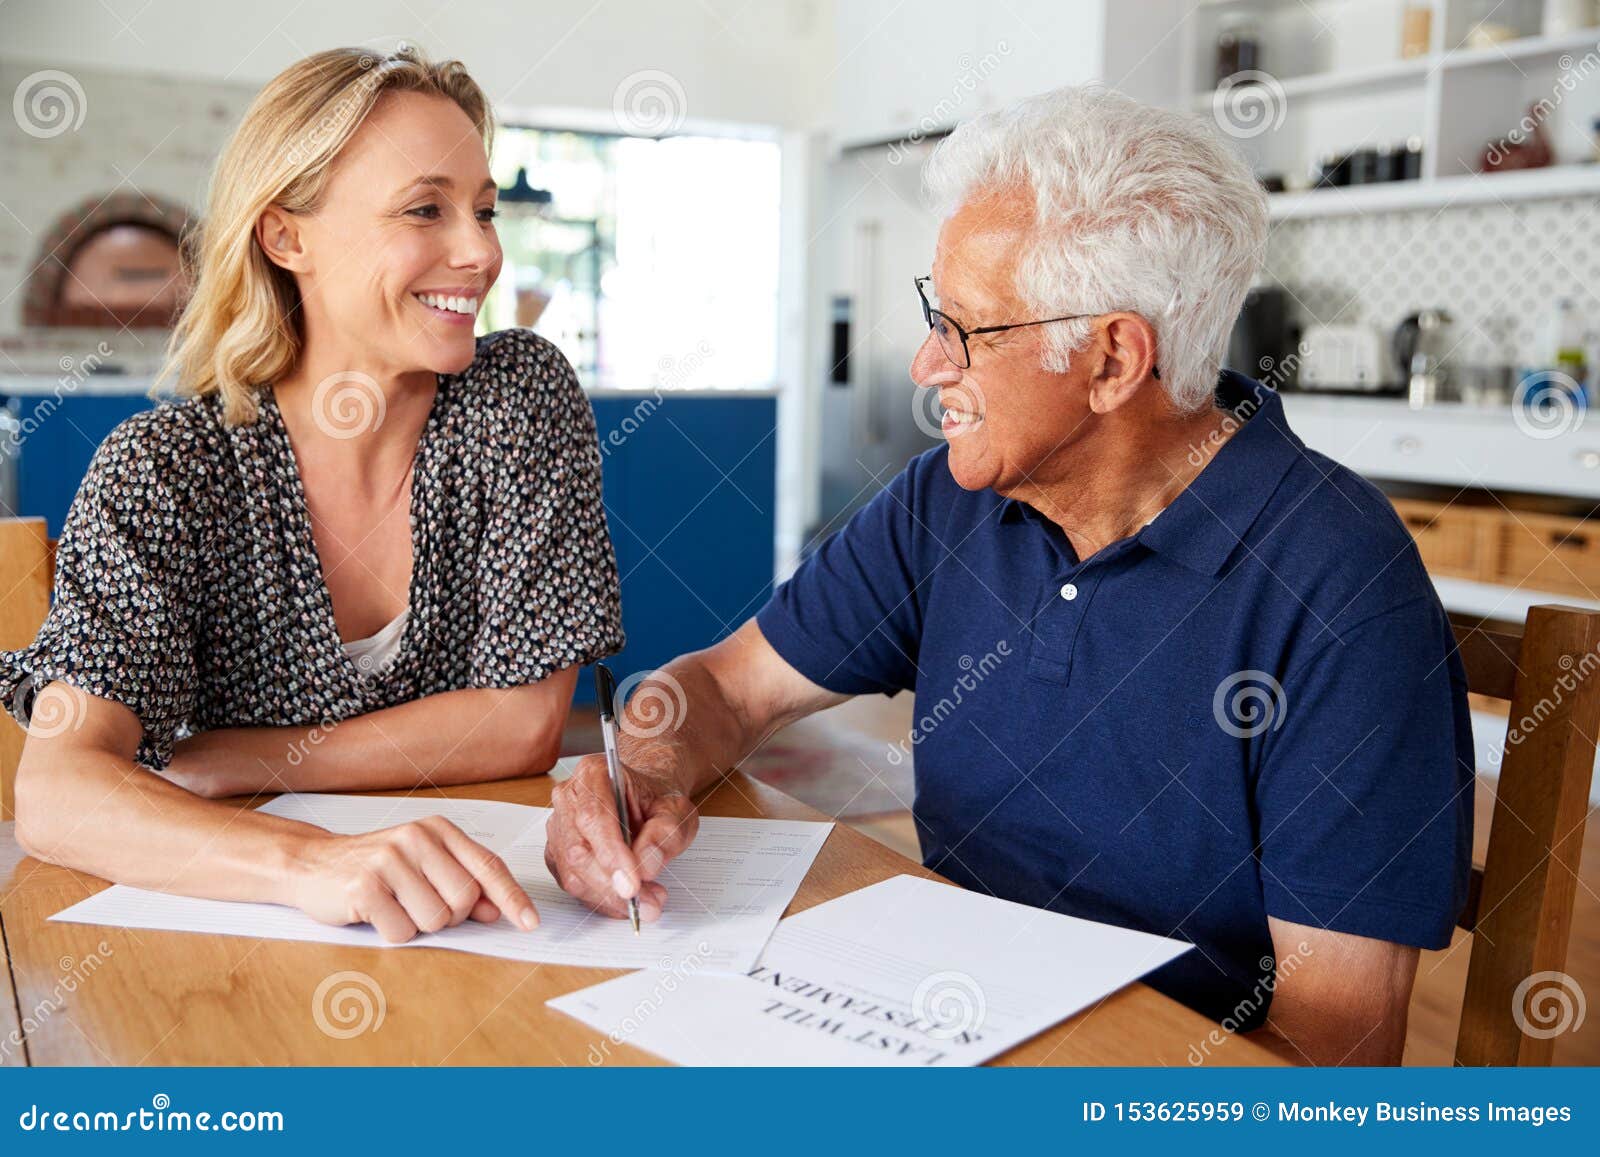 woman helping senior man to complete last will and testament at home